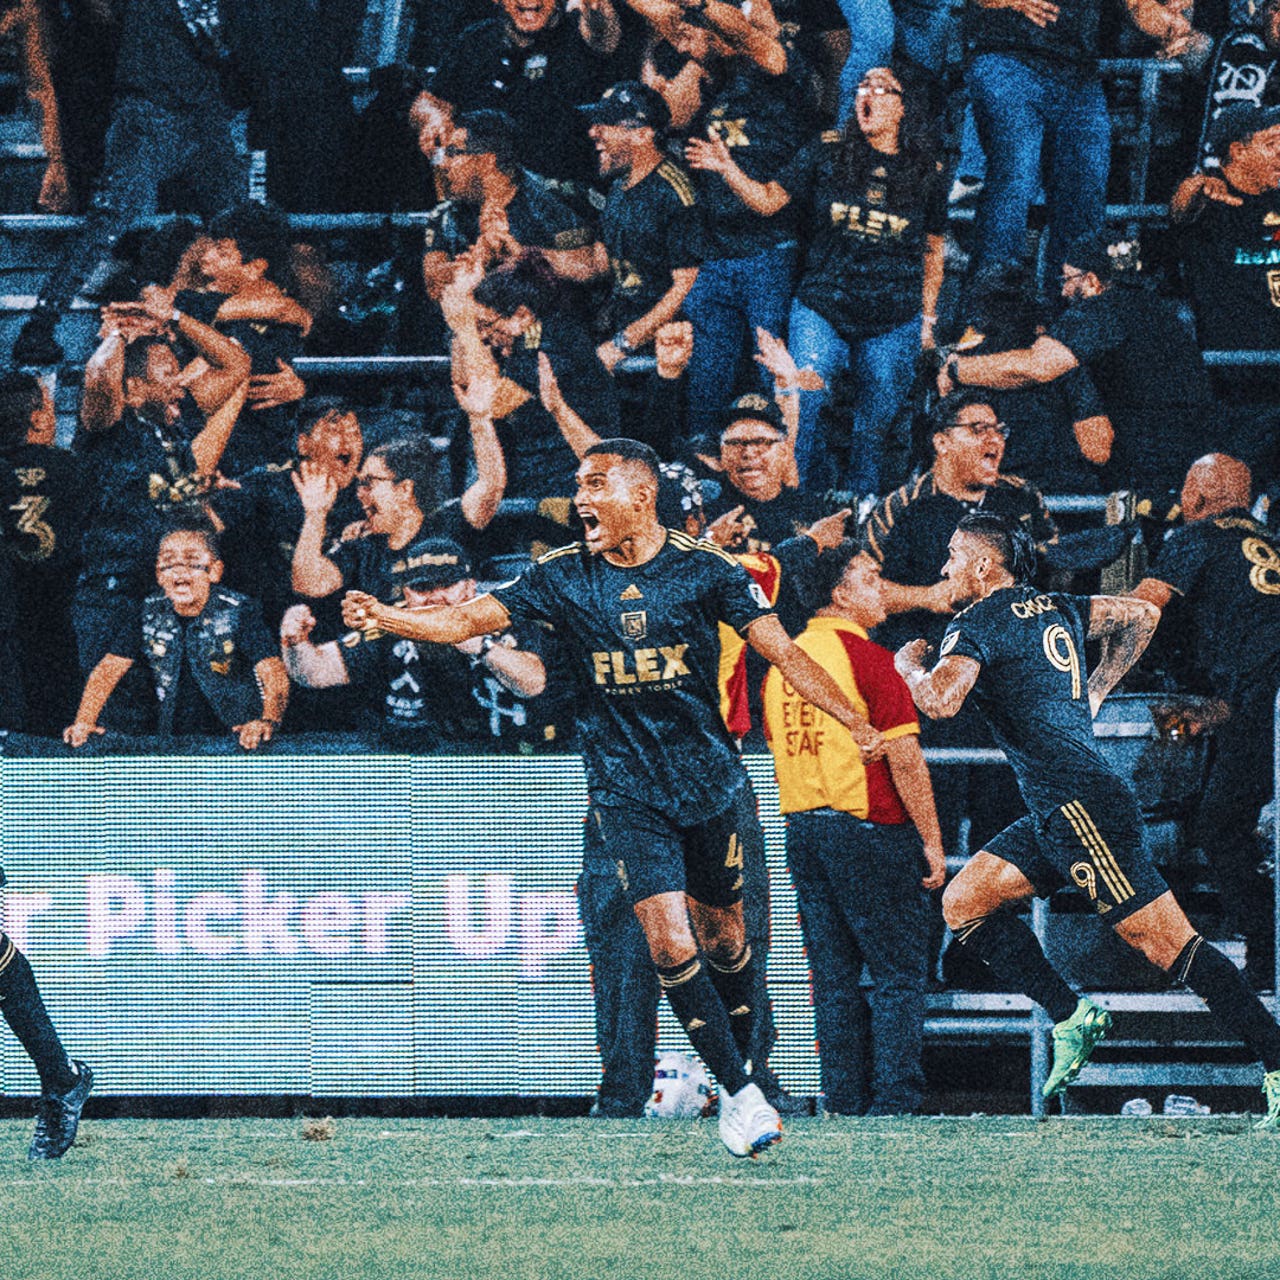 LAFC inch closer to MLS Cup with 3-2 win over Galaxy